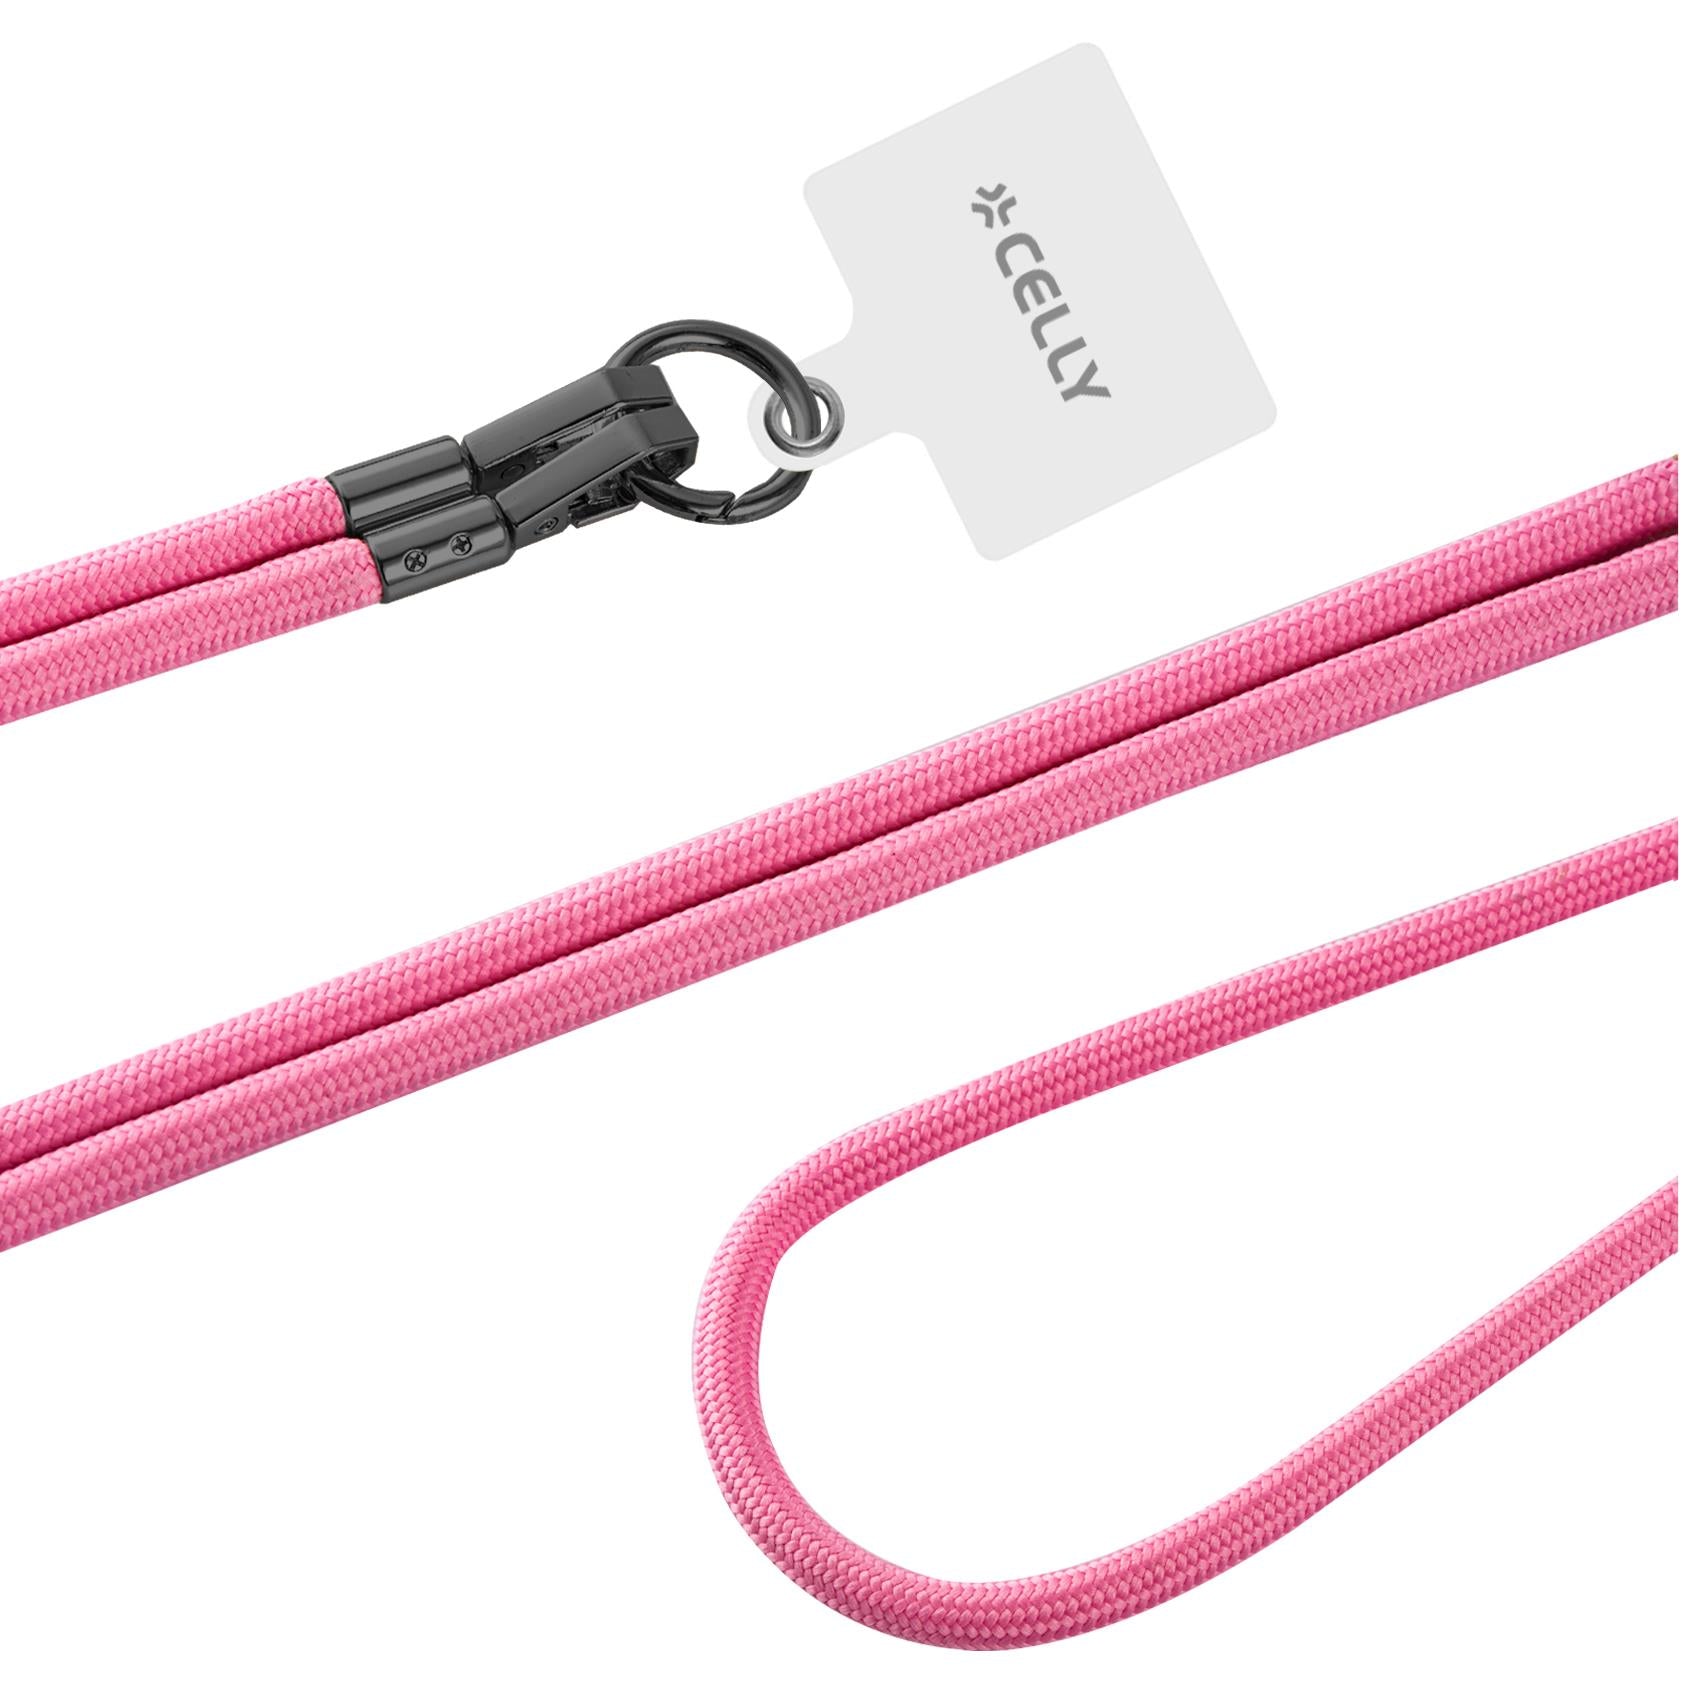 Celly FREEDOM LACET - Smartphone Neck Chain Pink